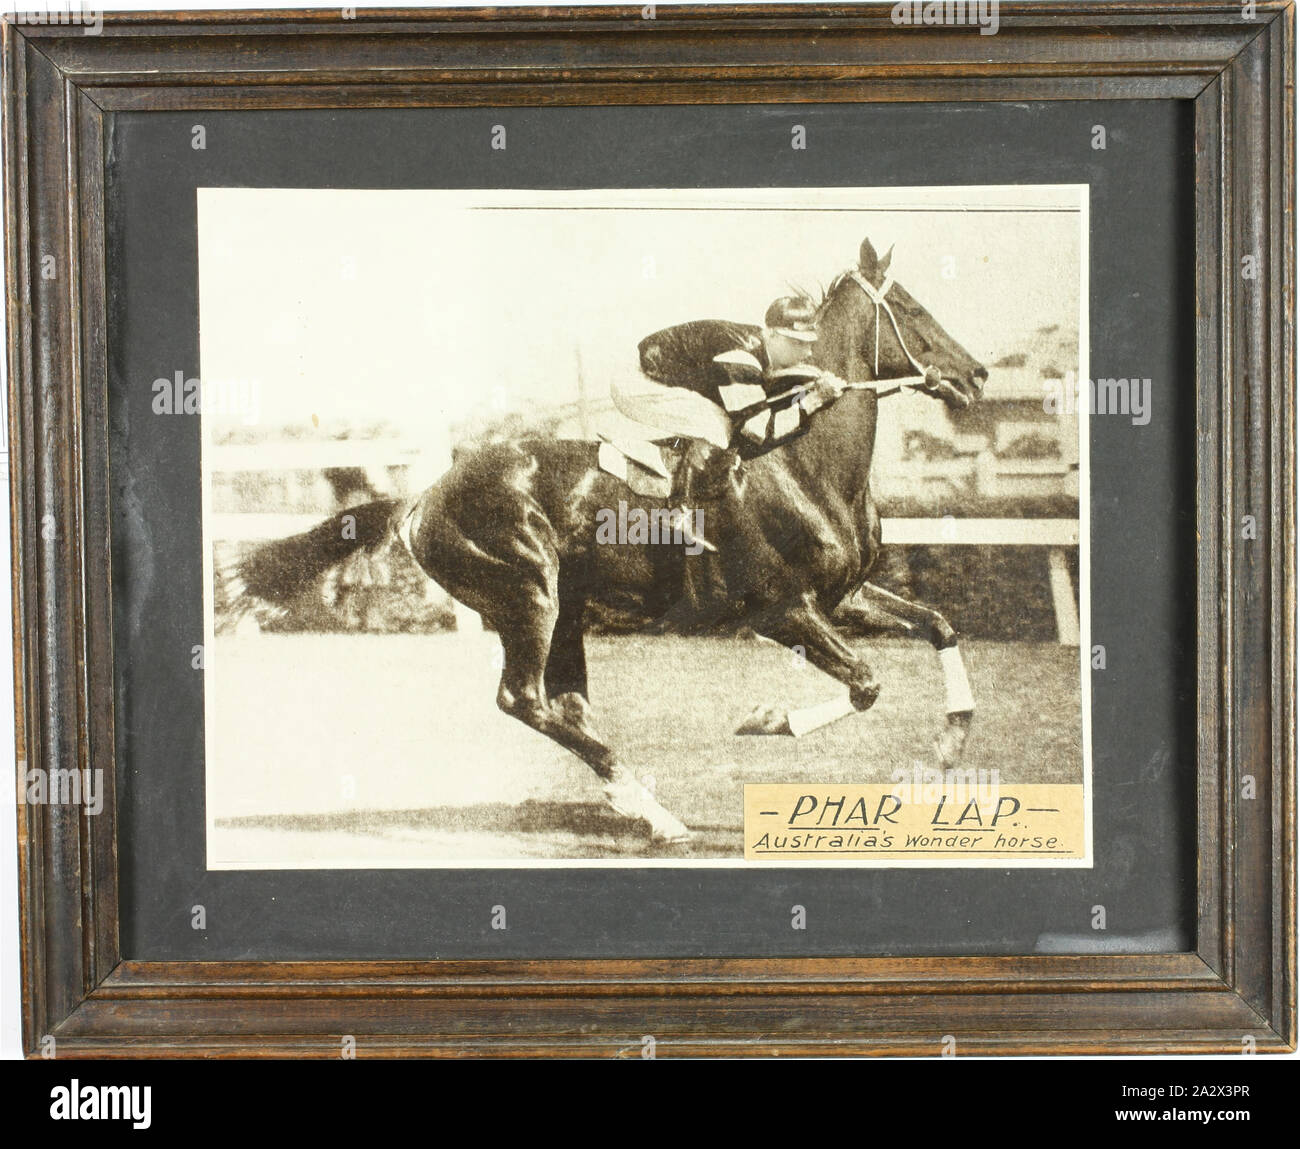 Photograph - Jimmy Pike & Phar Lap Racing, Framed, 1930s, Framed magazine photograph of Jim Pike riding on the back of Phar Lap during a horse race. He is wearing the black and white Telford silks Stock Photo